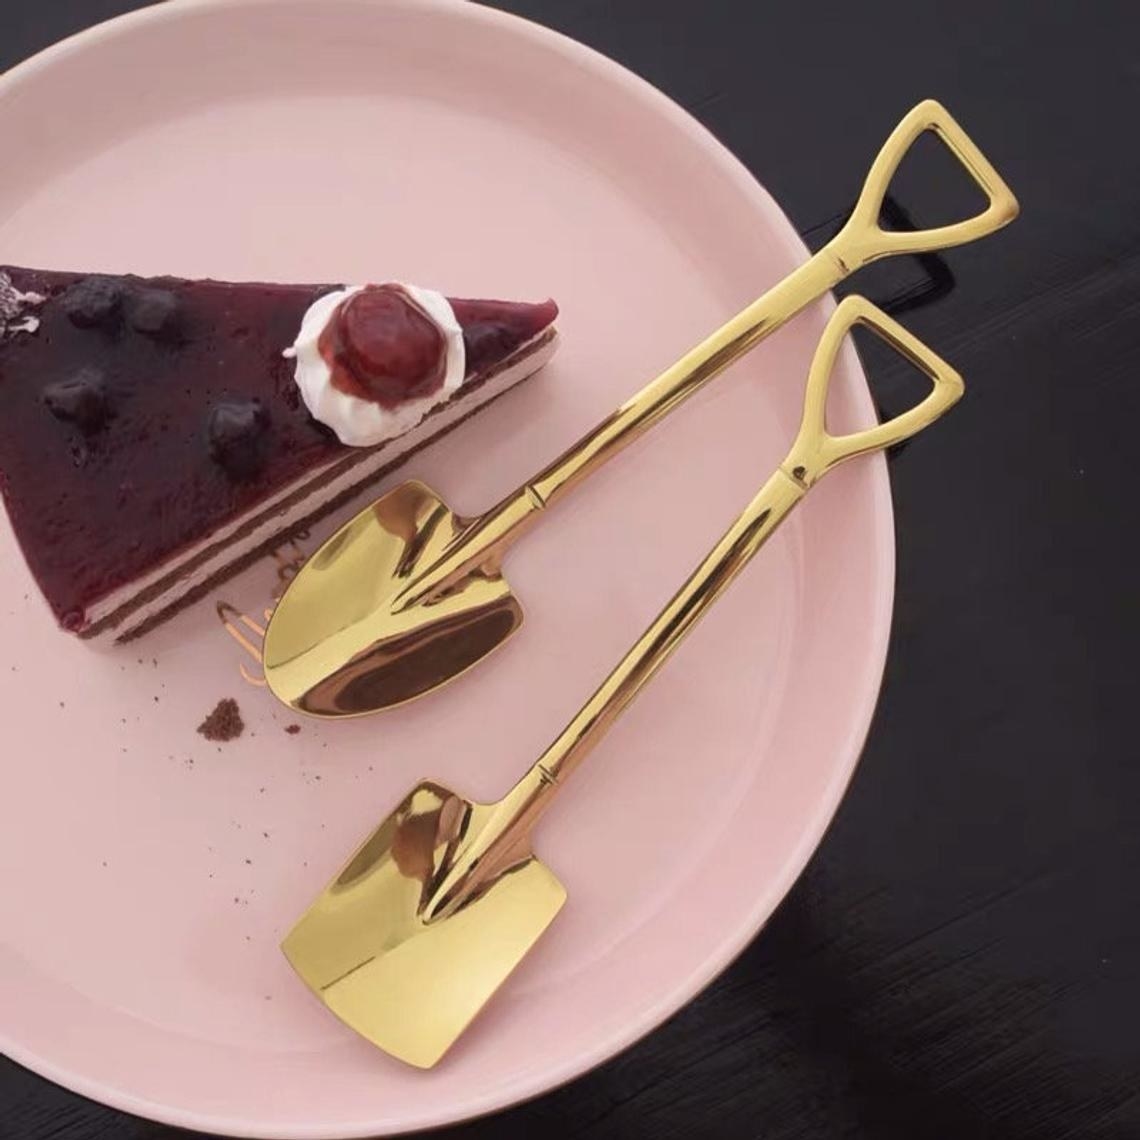 Two shovel spoons next to a slice of cake